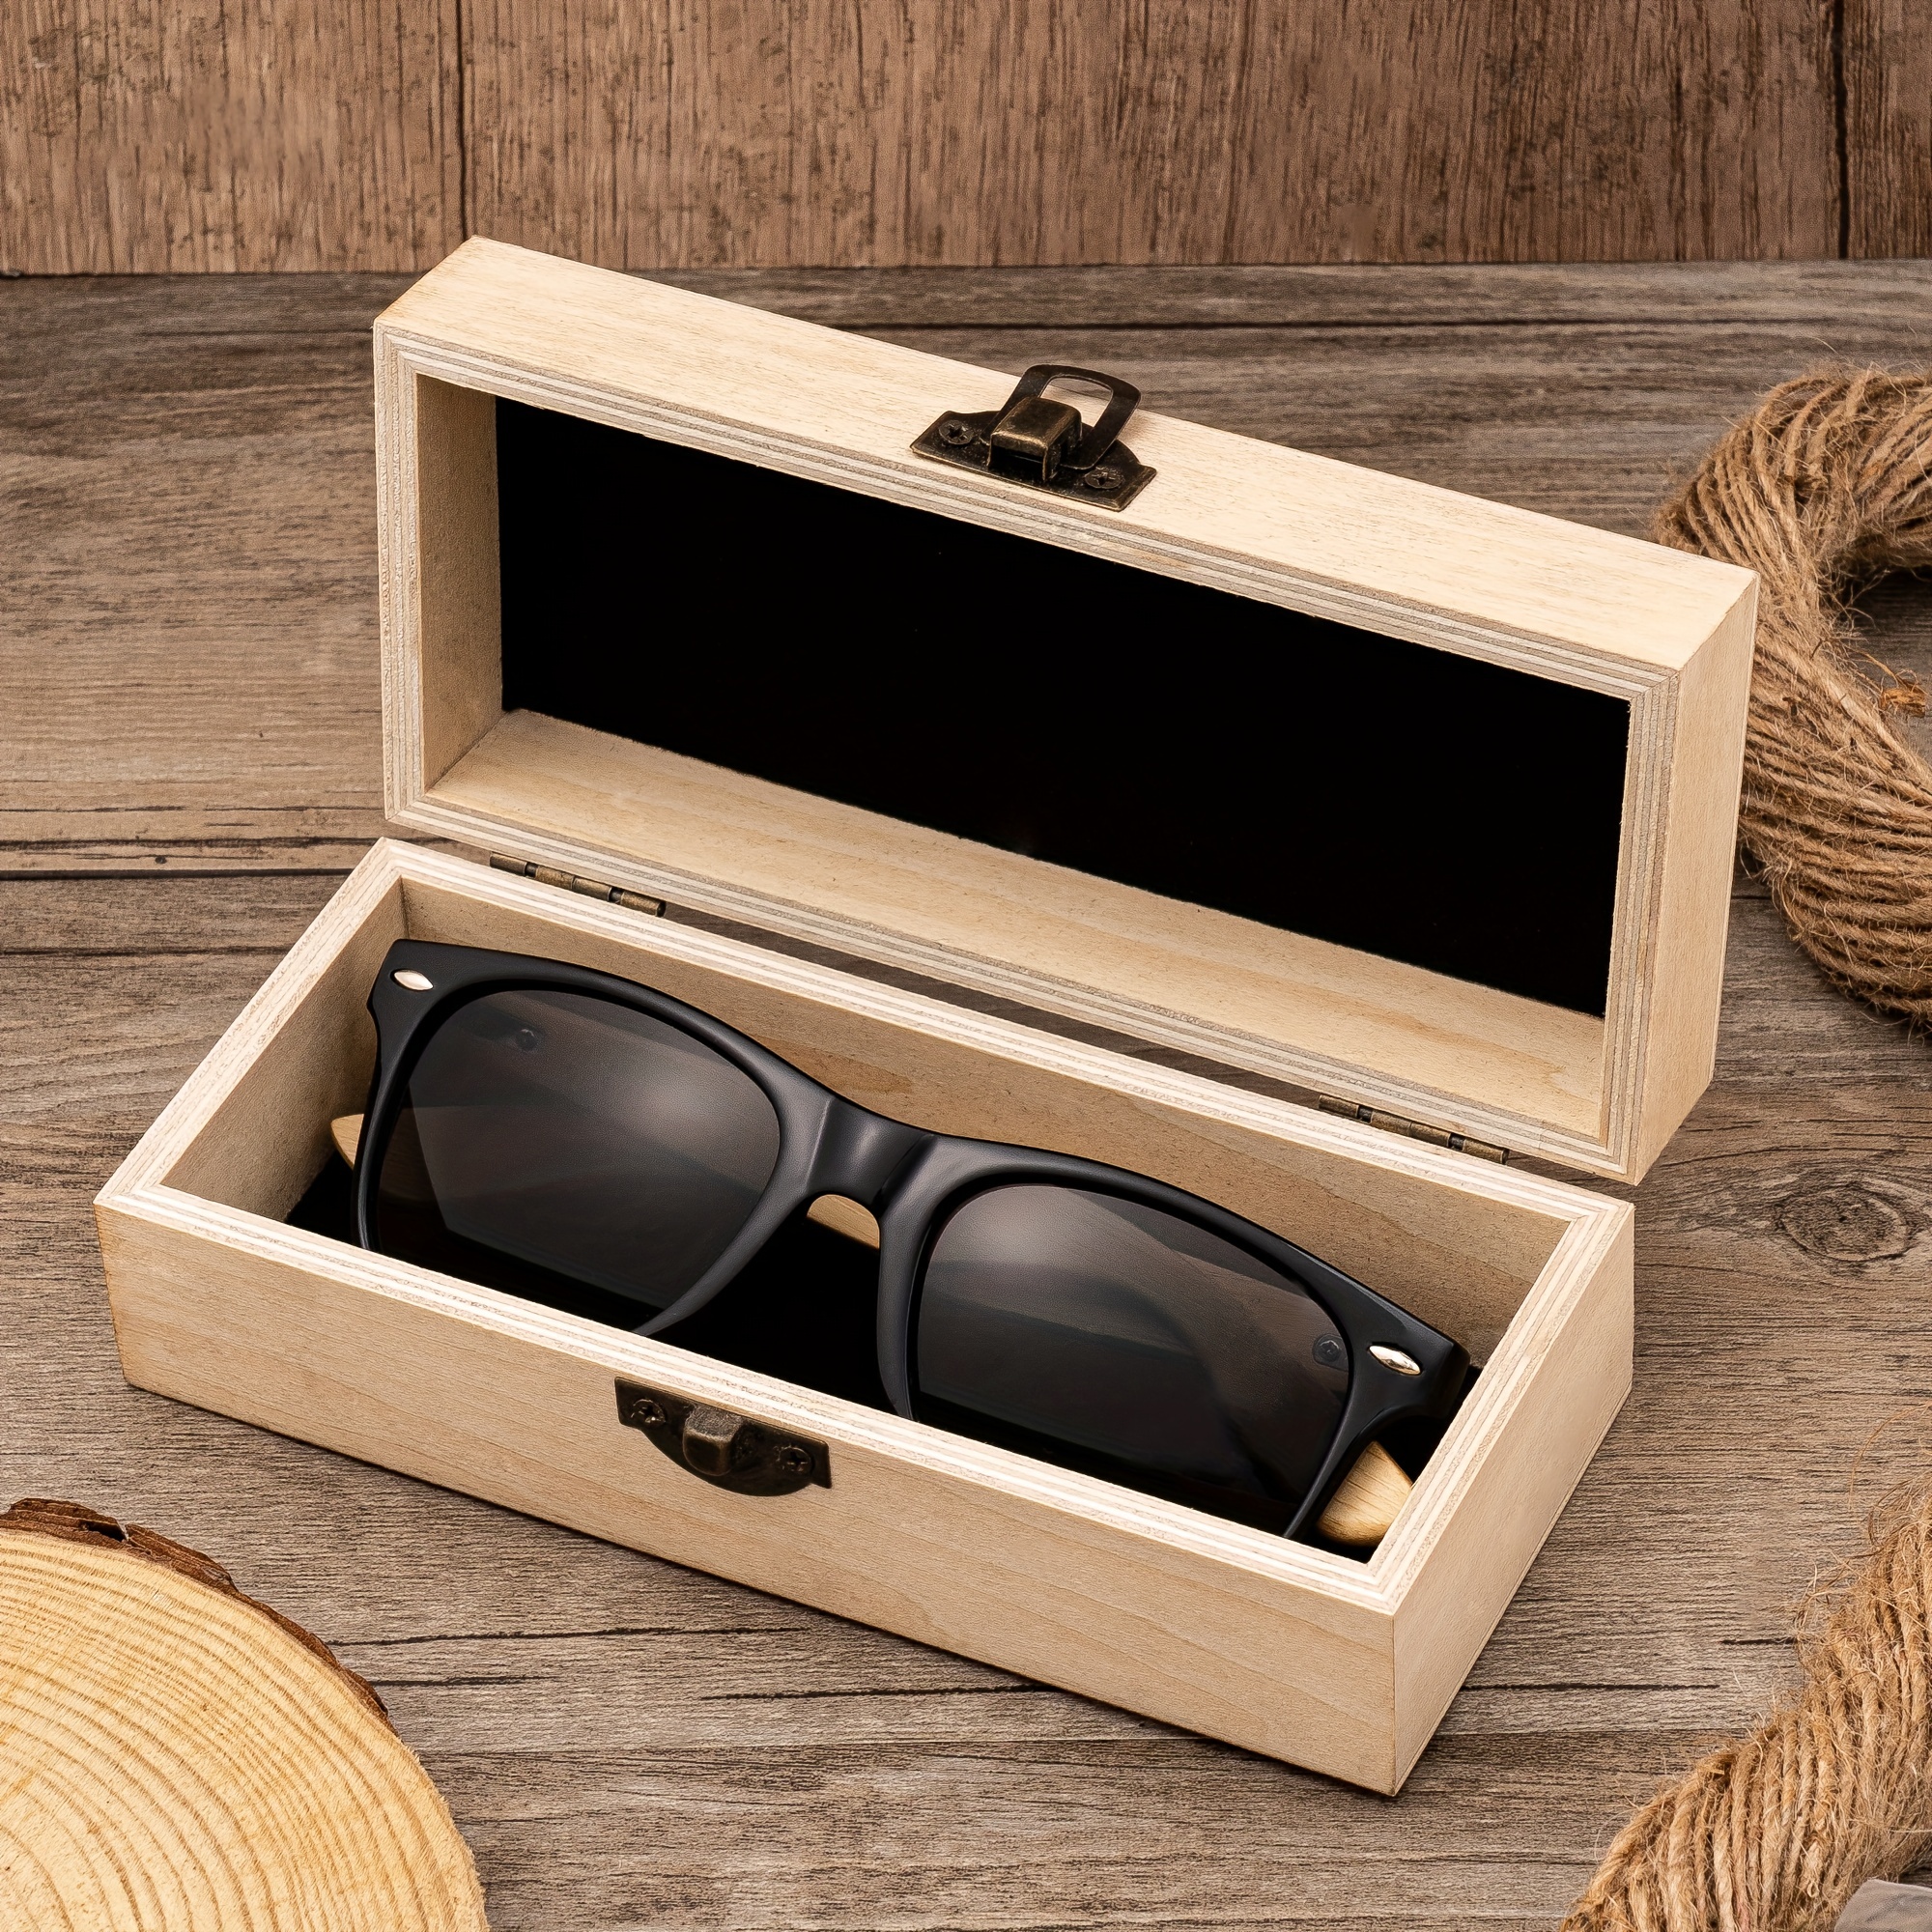 Personalized Wooden Sunglasses for Men, Groomsmen Gifts, Custom Sunglasses, Groomsmen Proposal, Wedding Gifts for Guys, Bachelor Party Gift Father